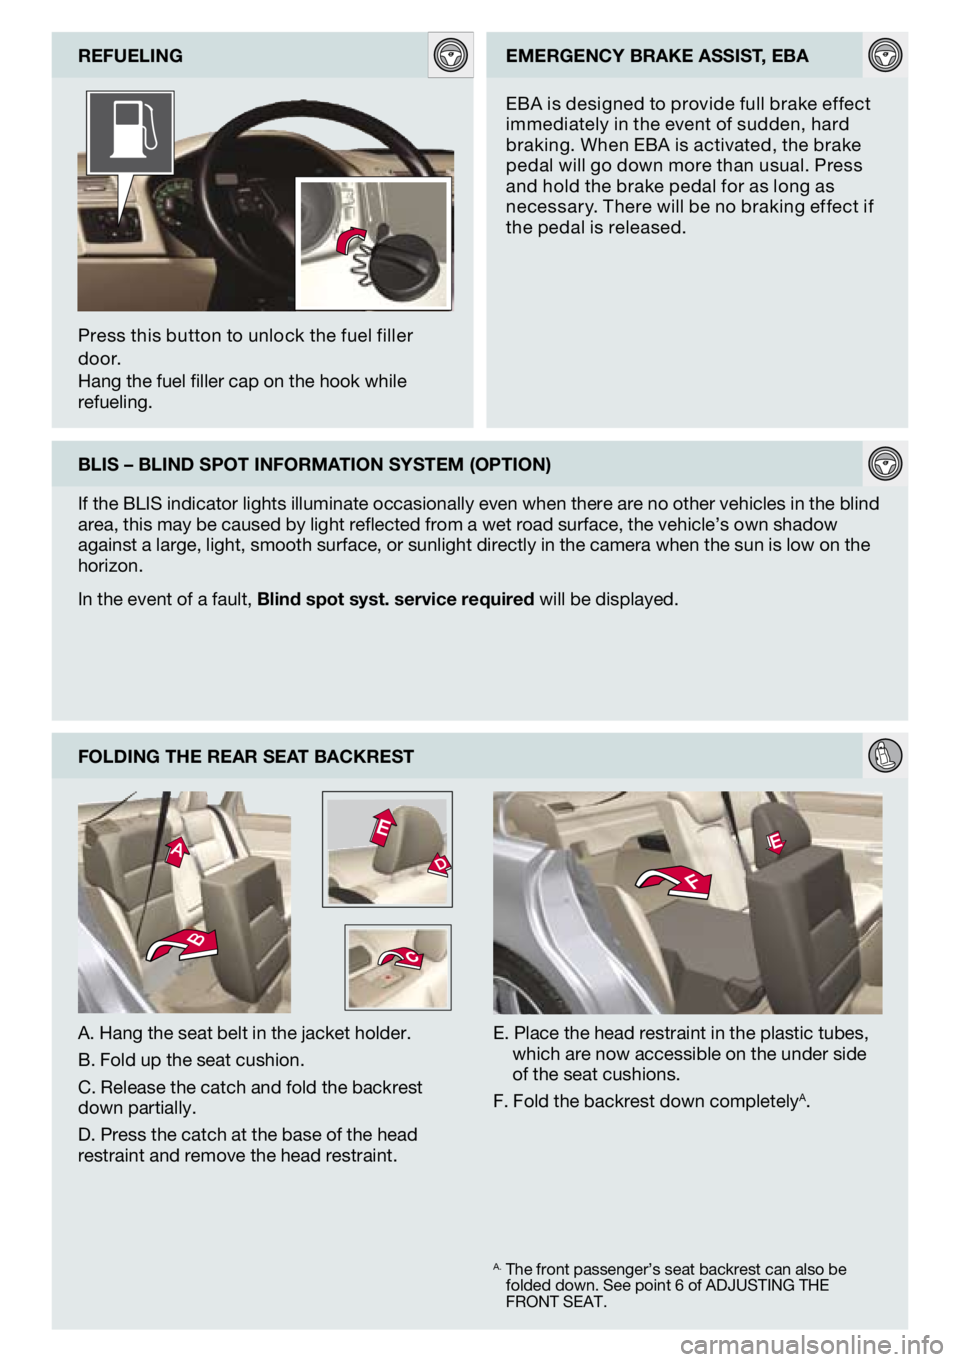 VOLVO S40 2009  Quick Guide 
FOldIng The ReAR SeAT bAckReST
A. Hang the seat belt in the jacket holder.
B. Fold up the seat cushion.
C. Release the catch and fold the backrest down partially.
D. Press the catch at the base of th